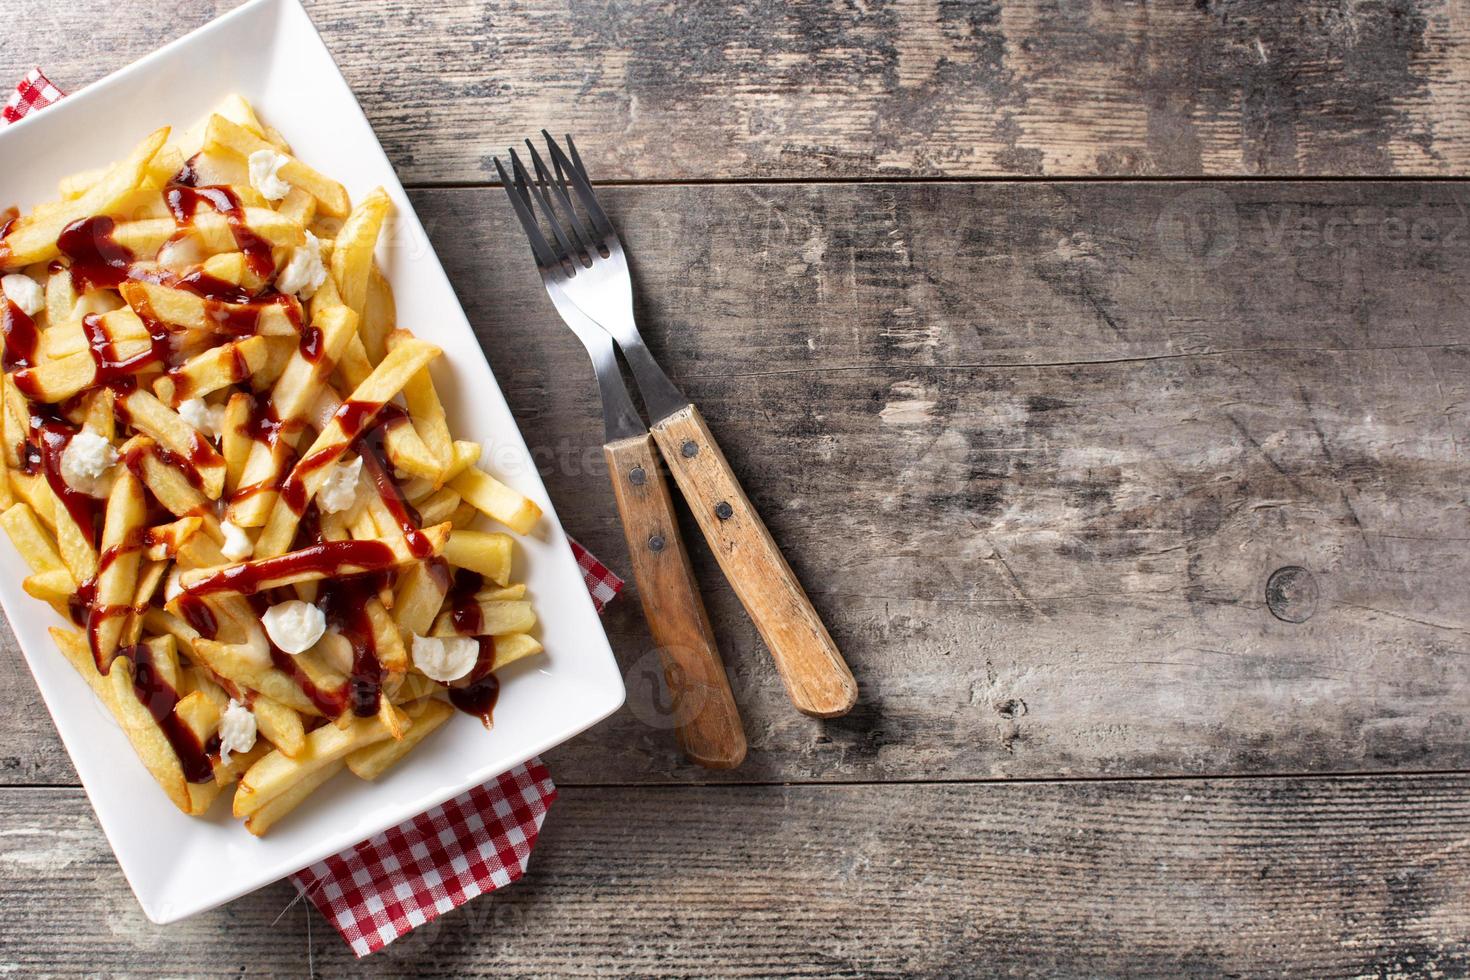 poutine traditionnelle canadienne photo